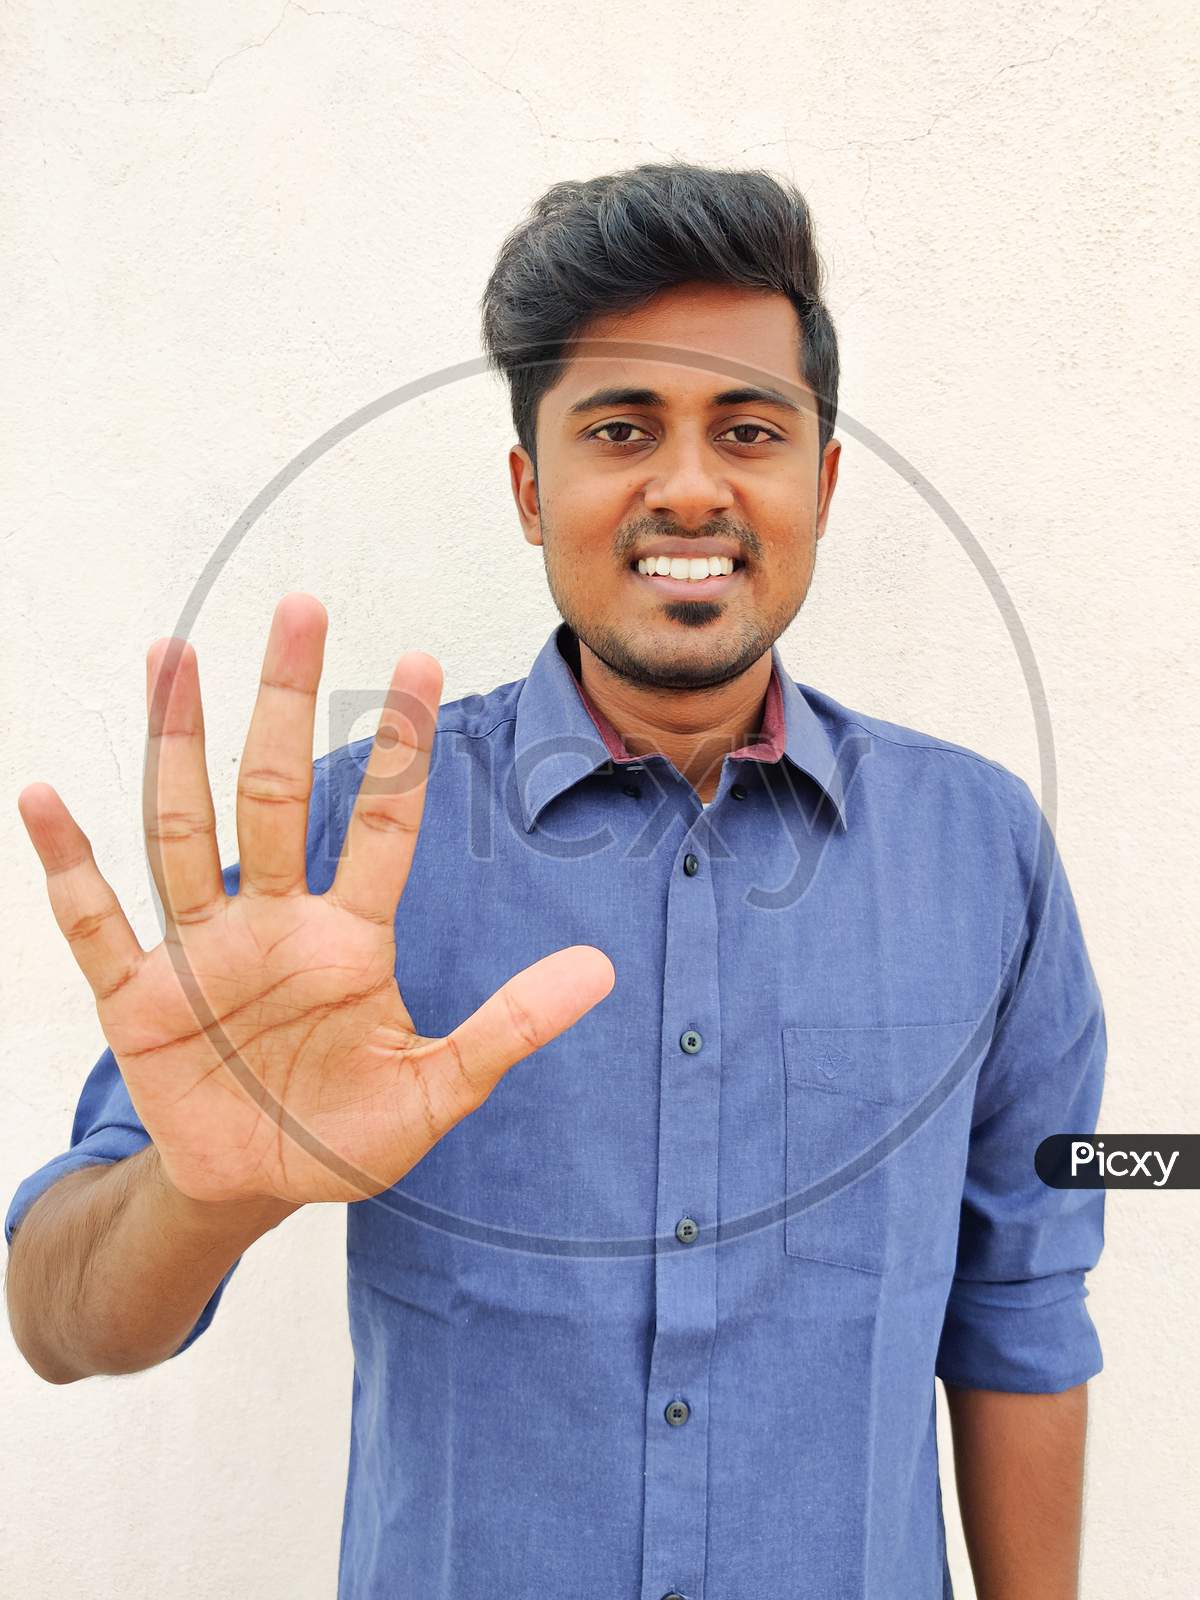 Smiling South Indian Young Man Wearing Blue Shirt Pointing Up With Fingers Number Five. Isolated On White Background.